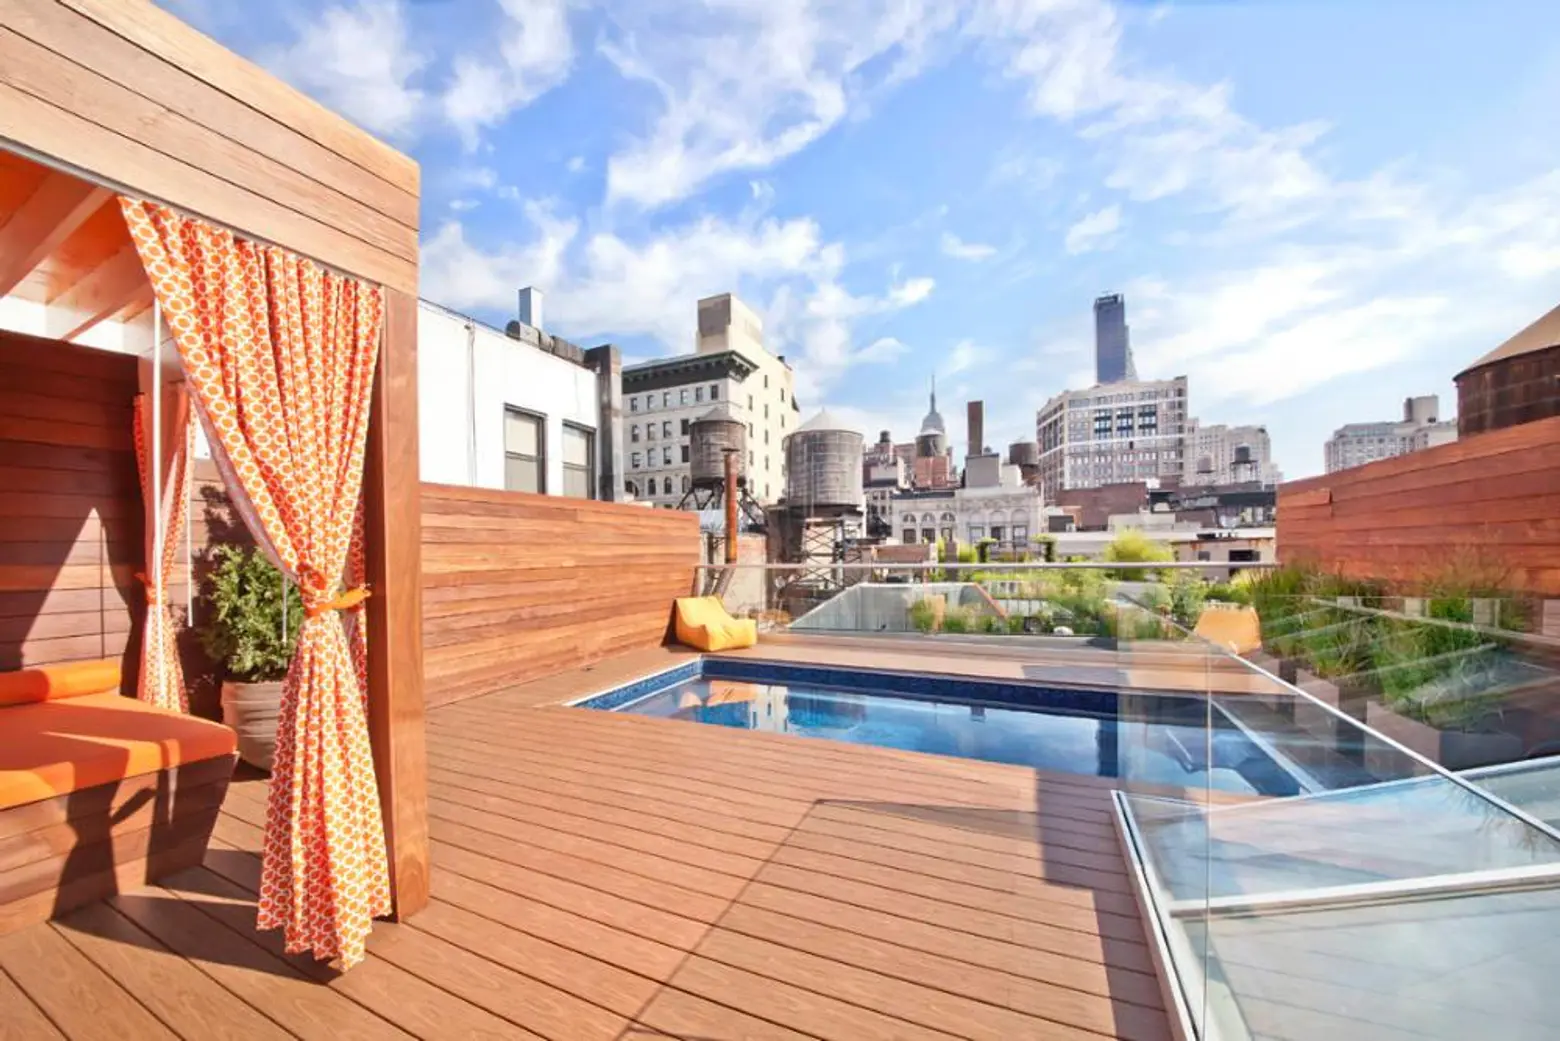 Enjoy Your Own Private Rooftop Pool in the Heart of the City for $40K a Month